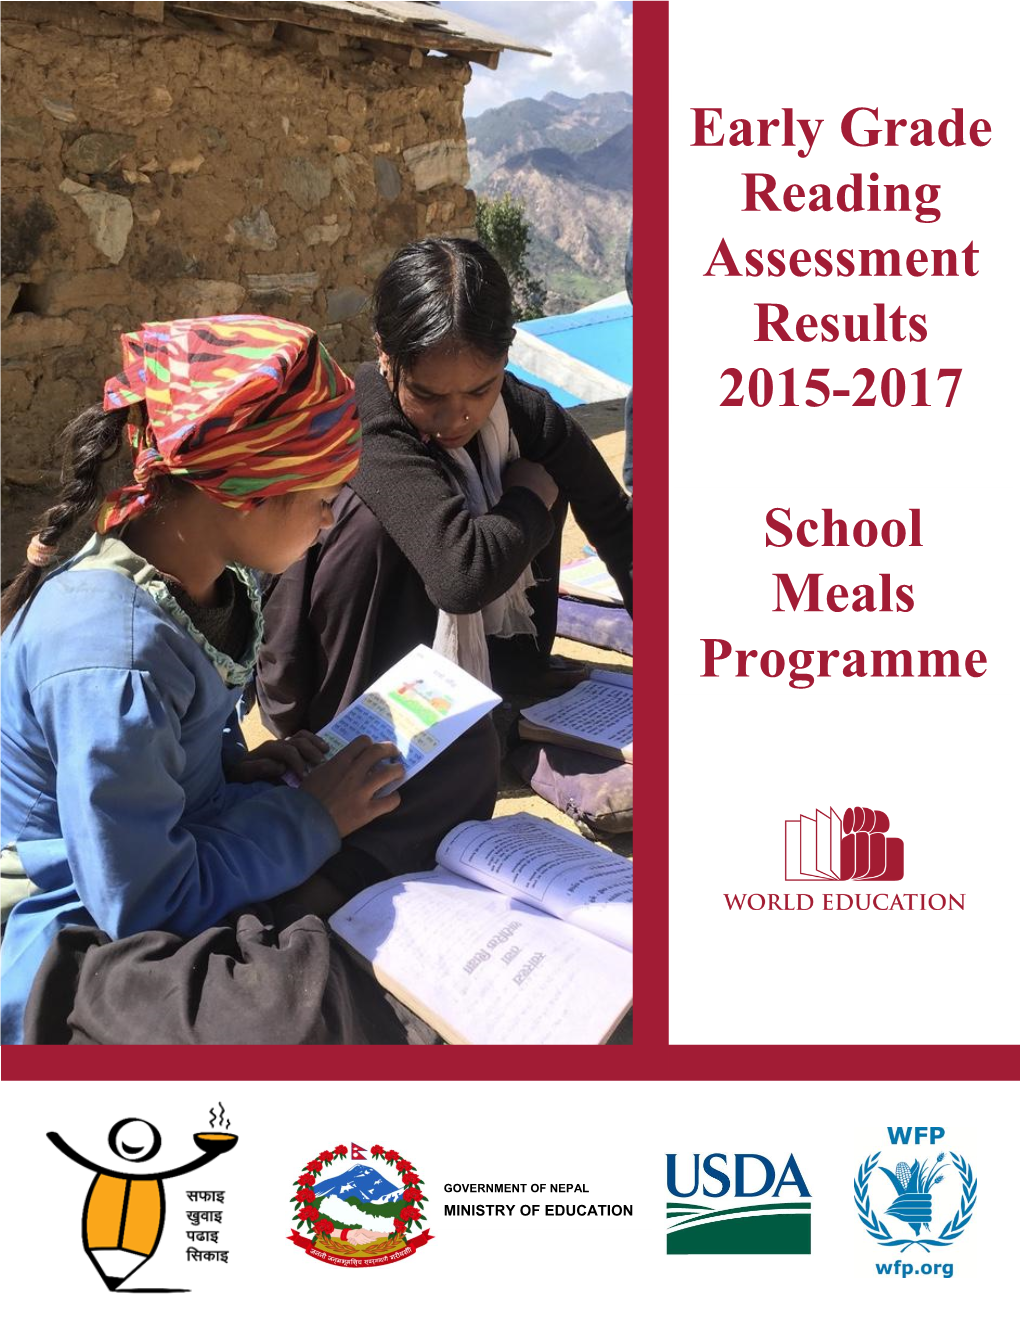 School Meals Programme Early Grade Reading Assessment Results